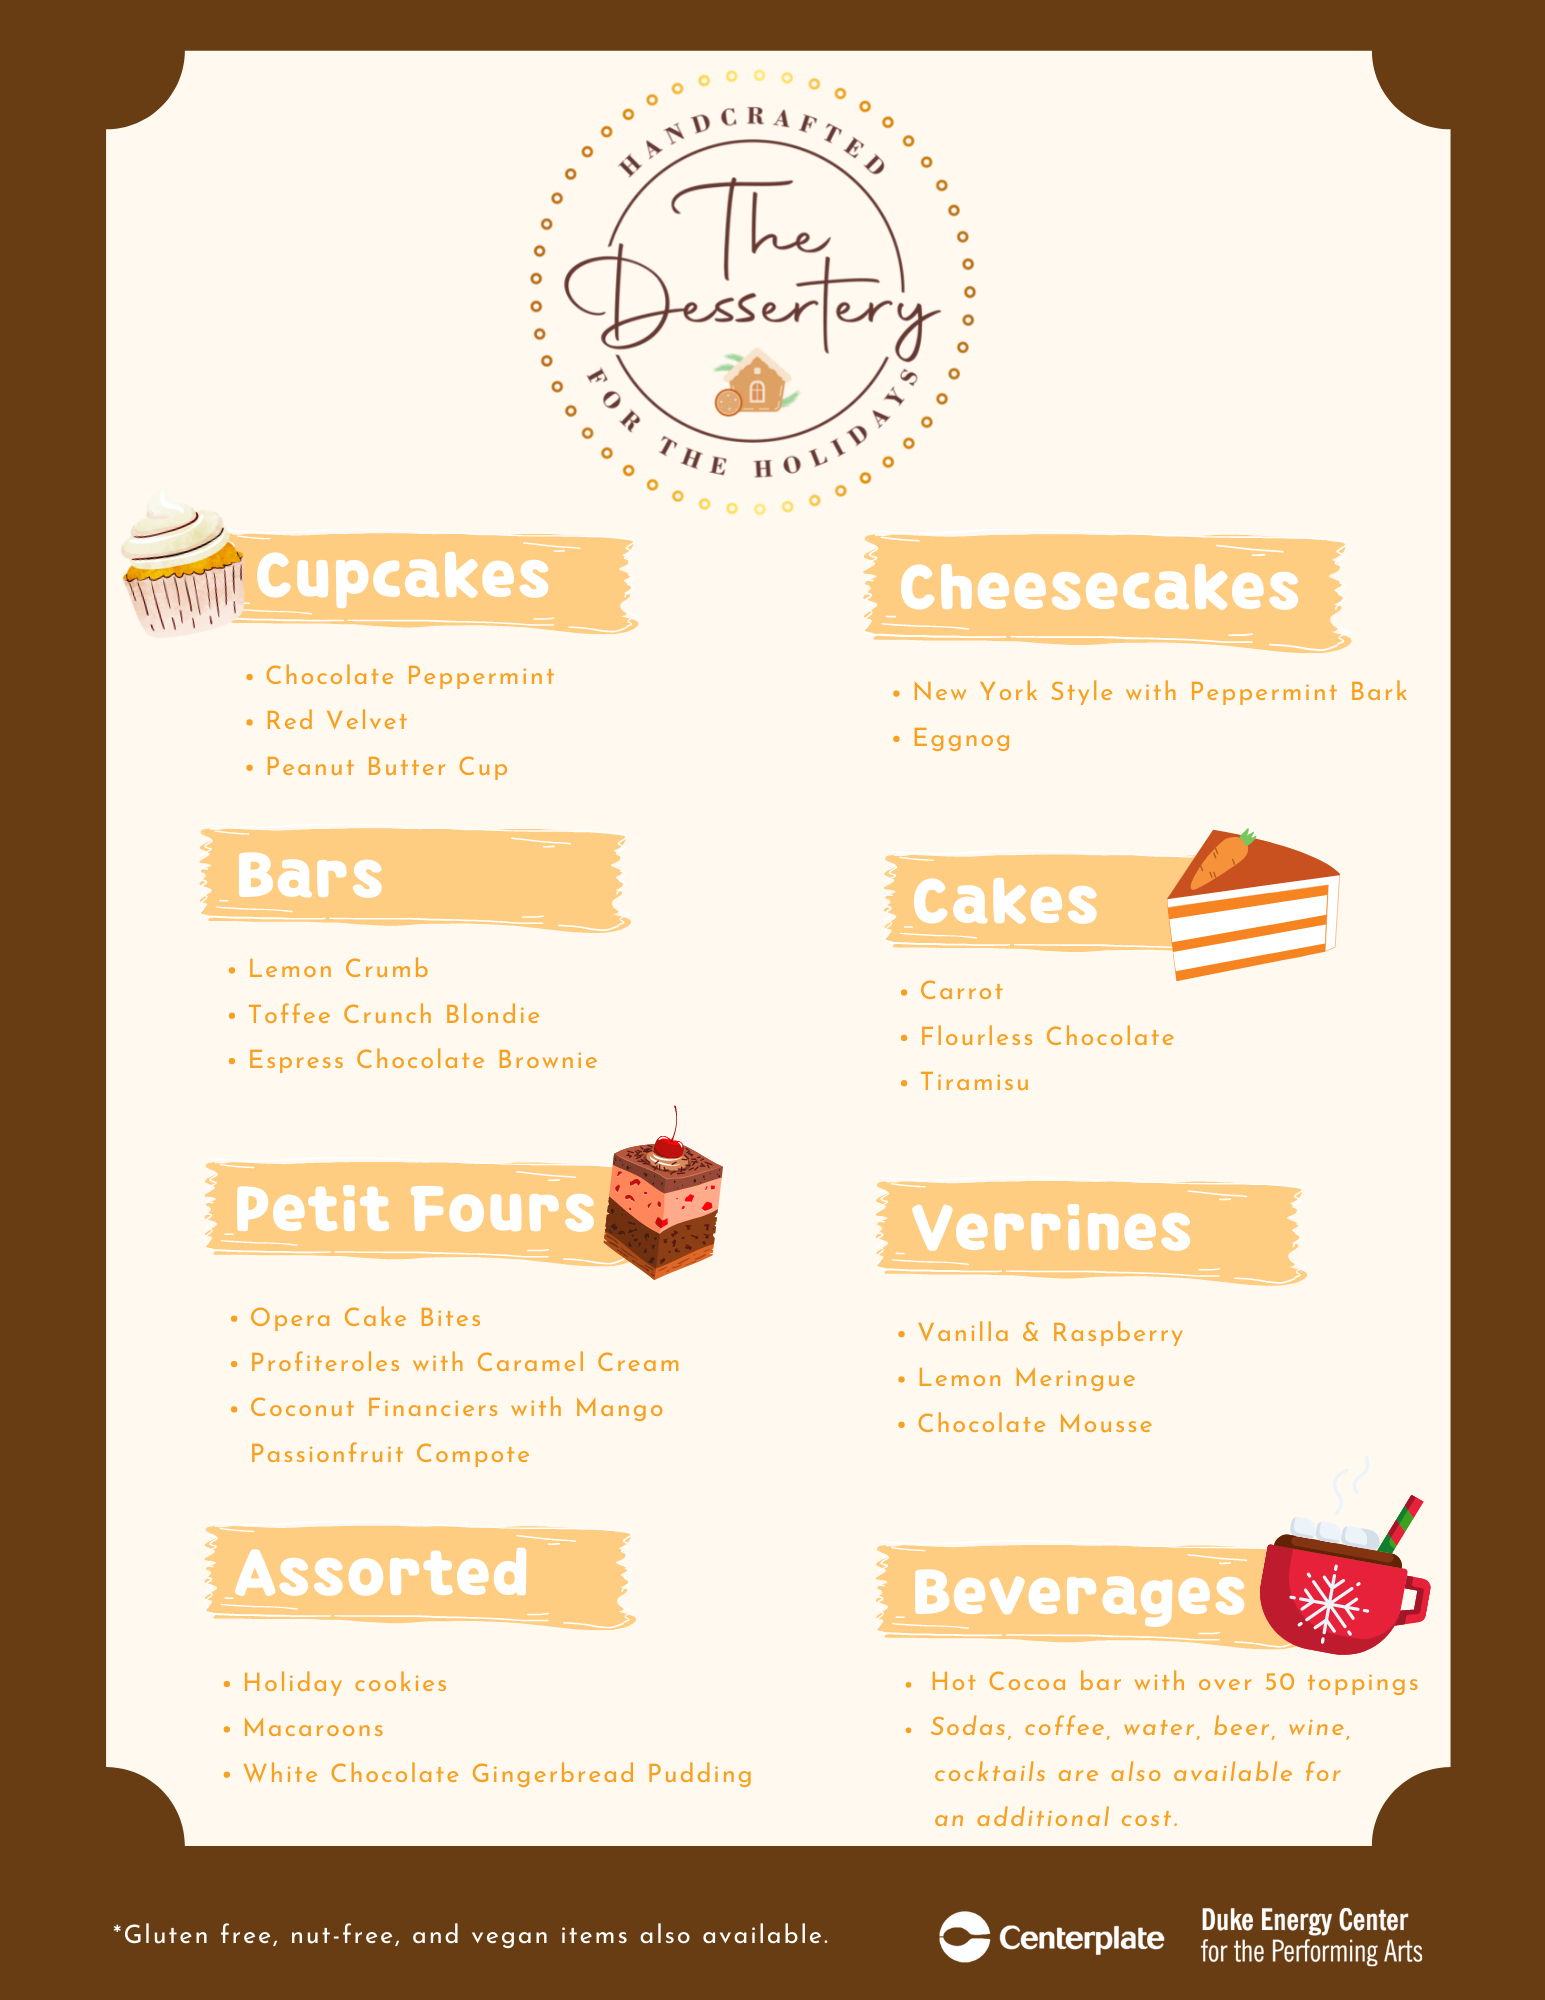 An image of the dessertery menu with a list of items